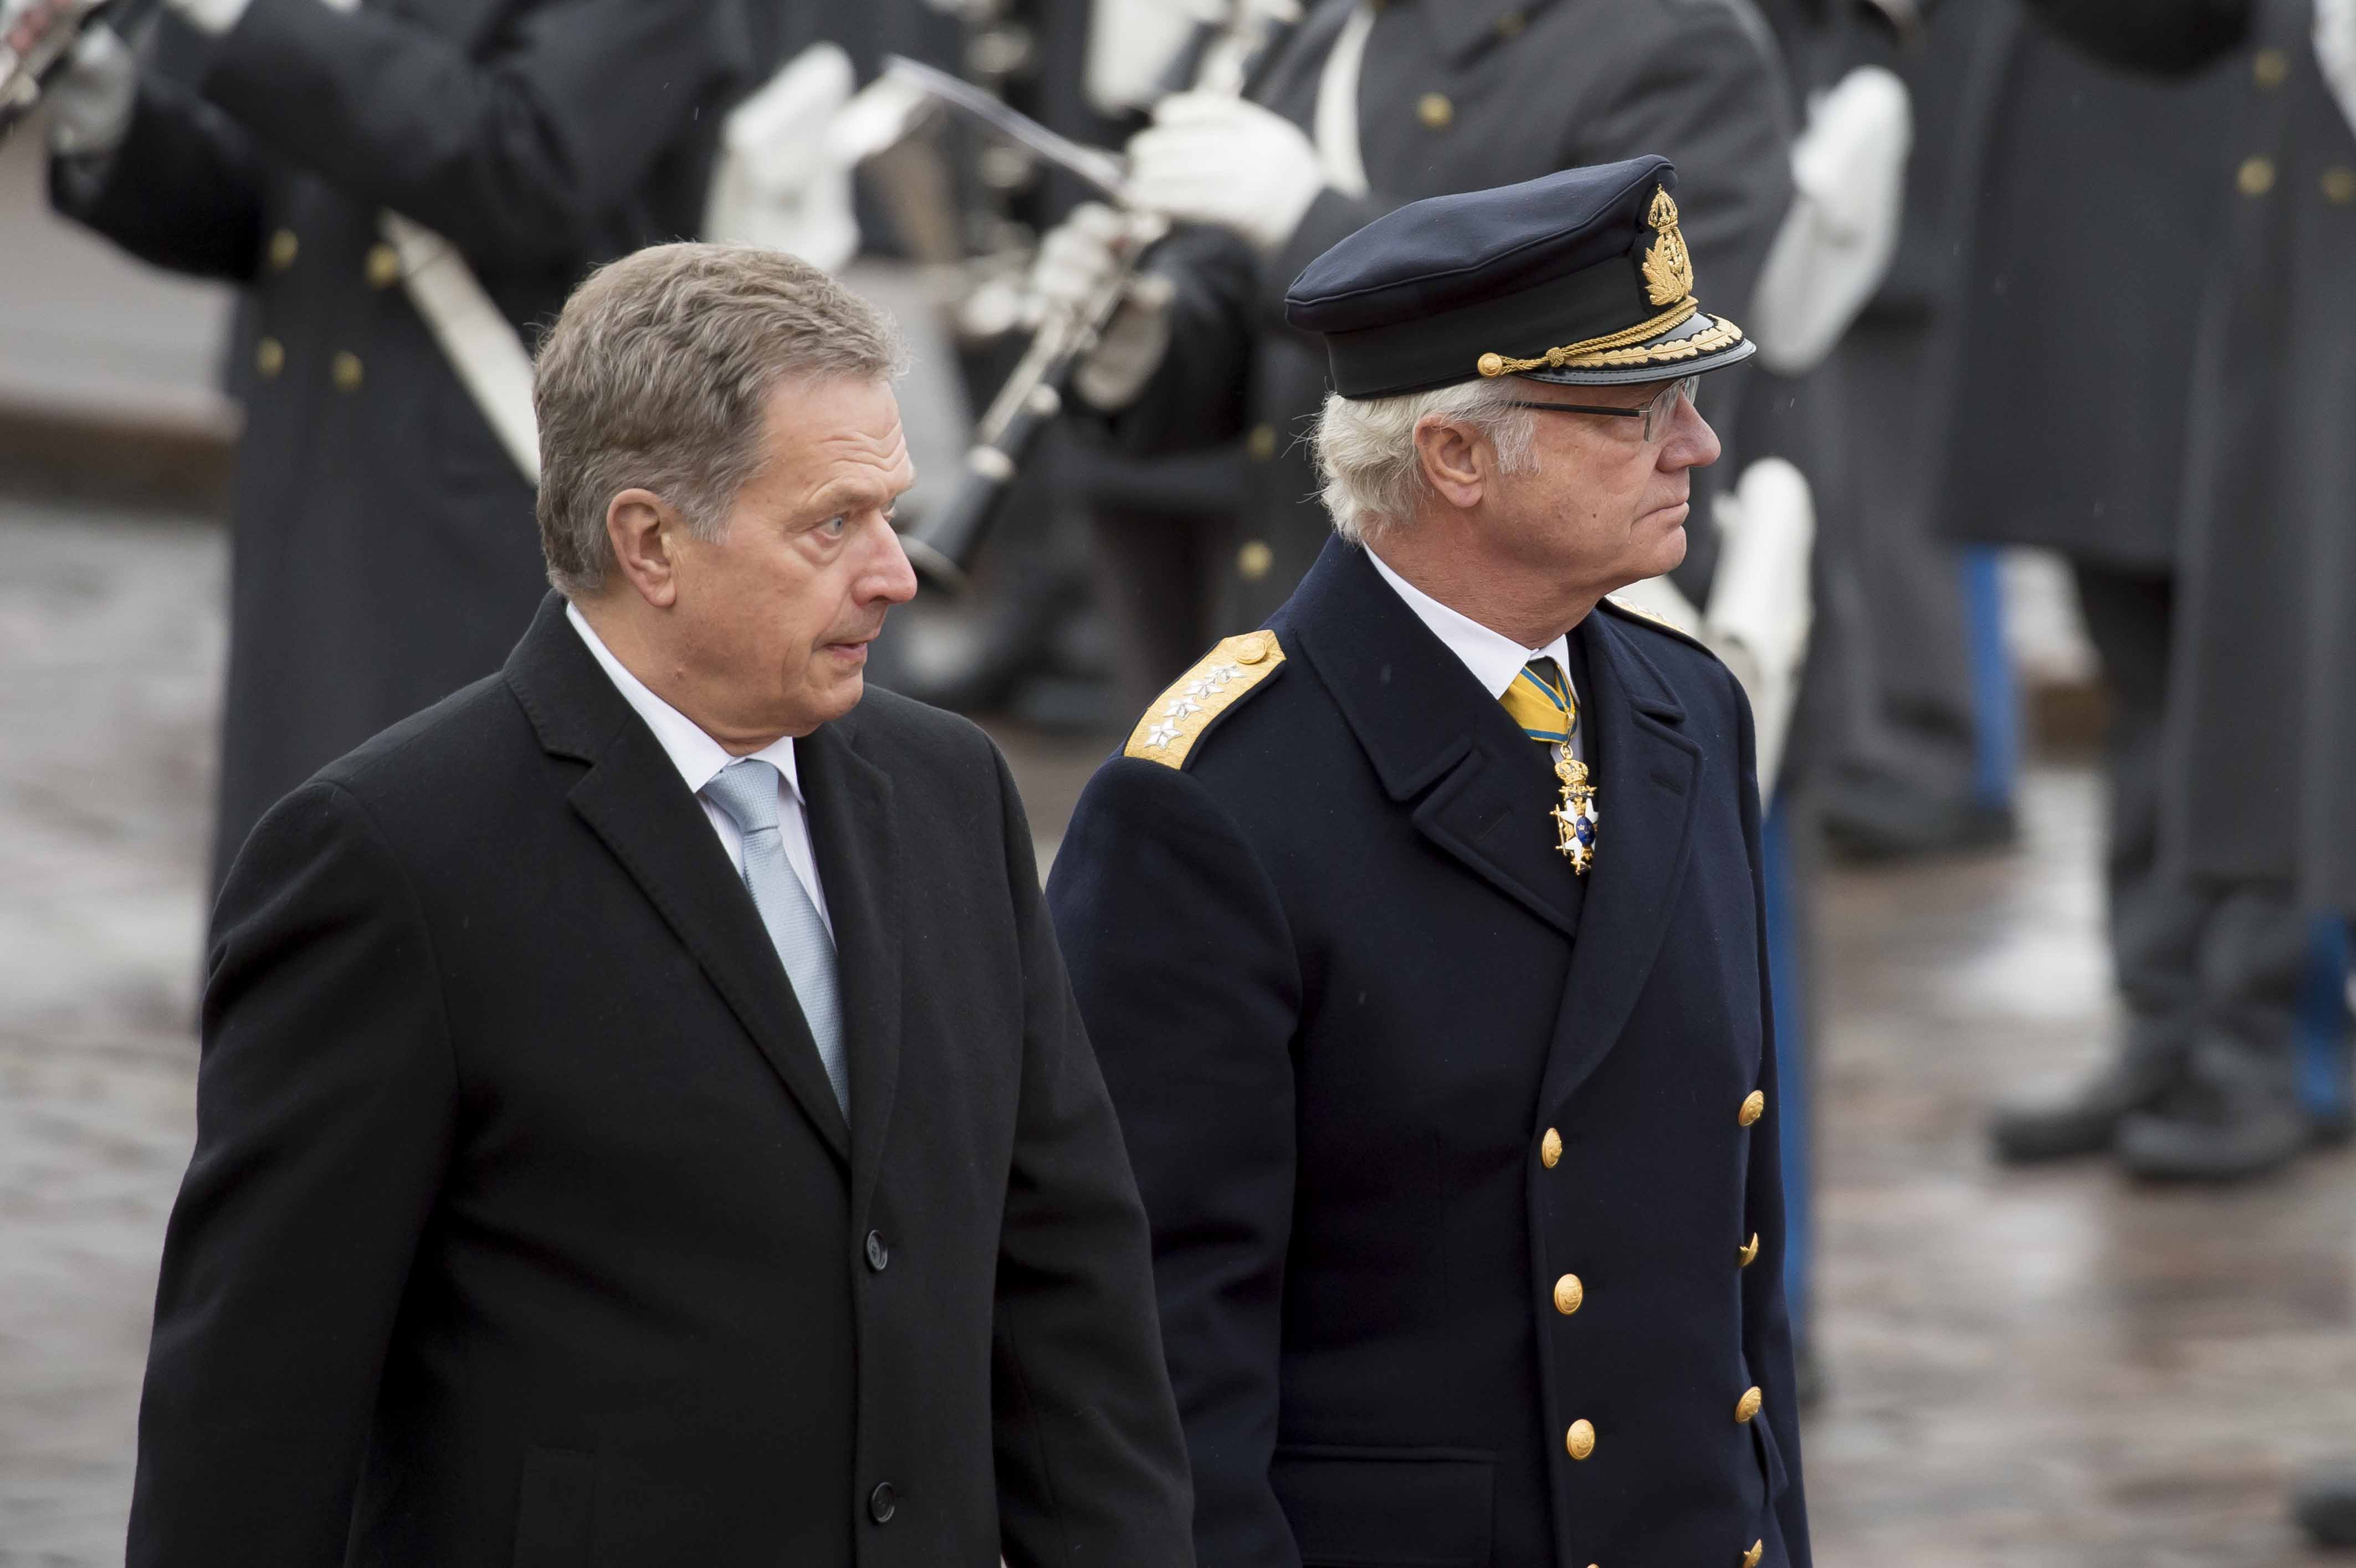 President Niinistö will pay a state visit to Sweden